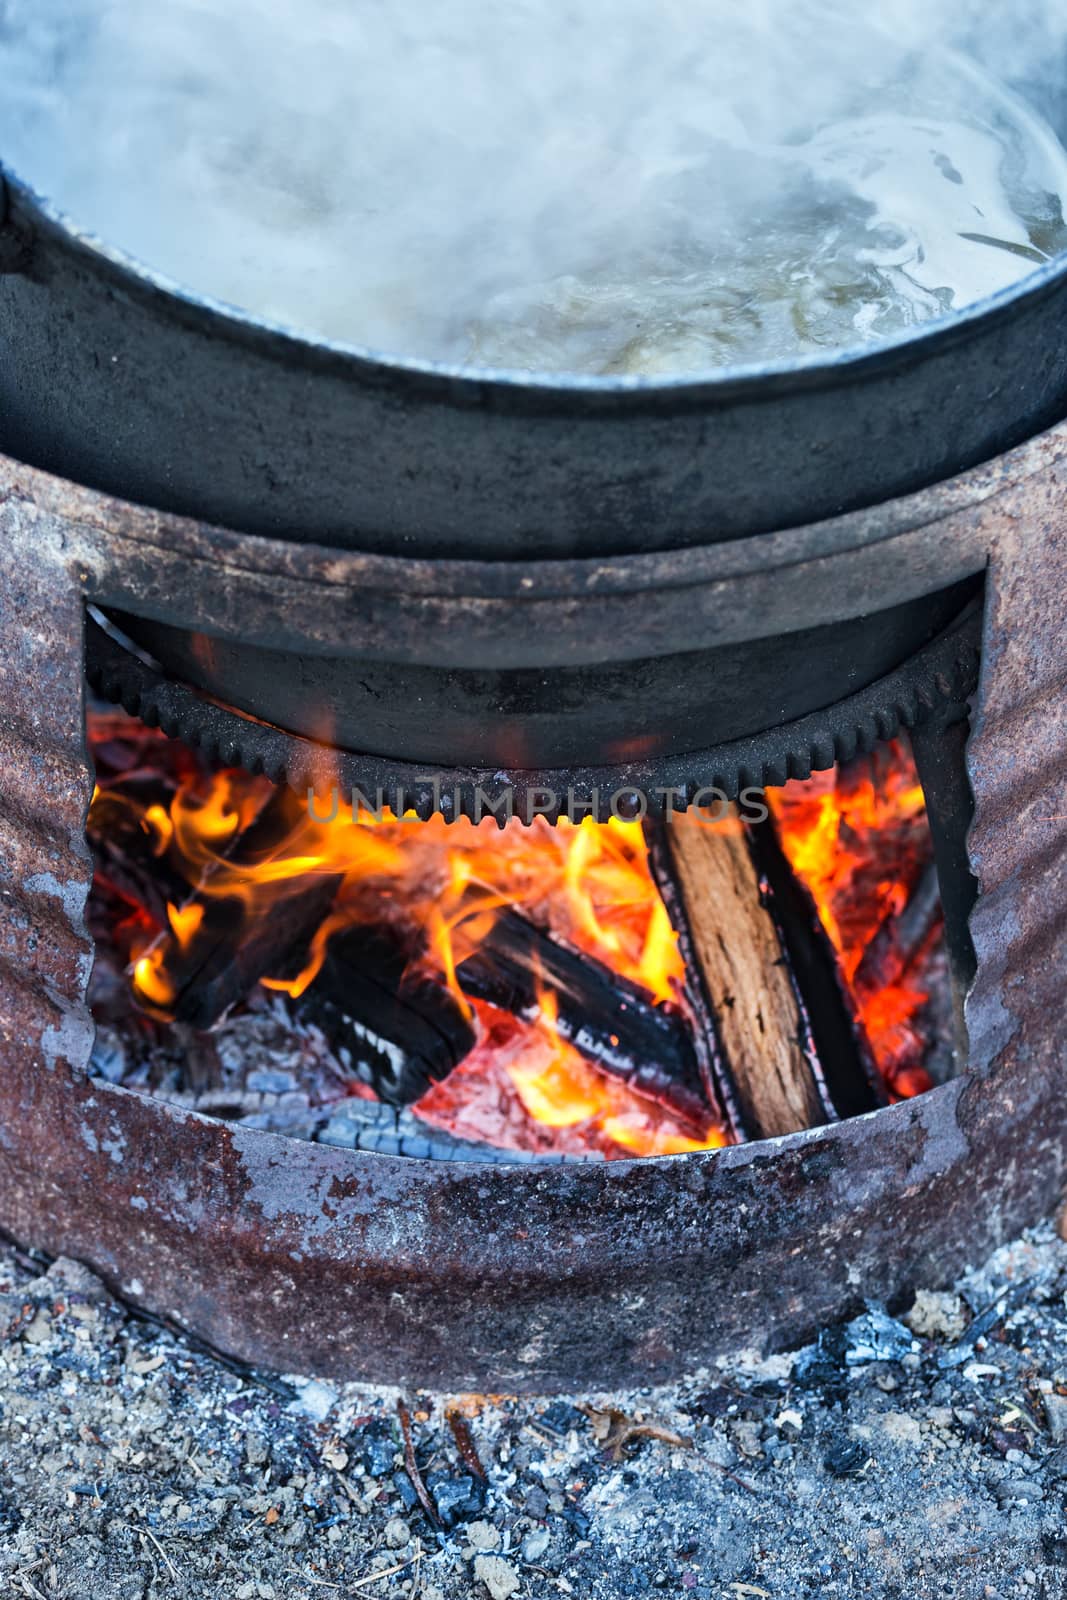 Preparing food on big pot, outside on wooden fire